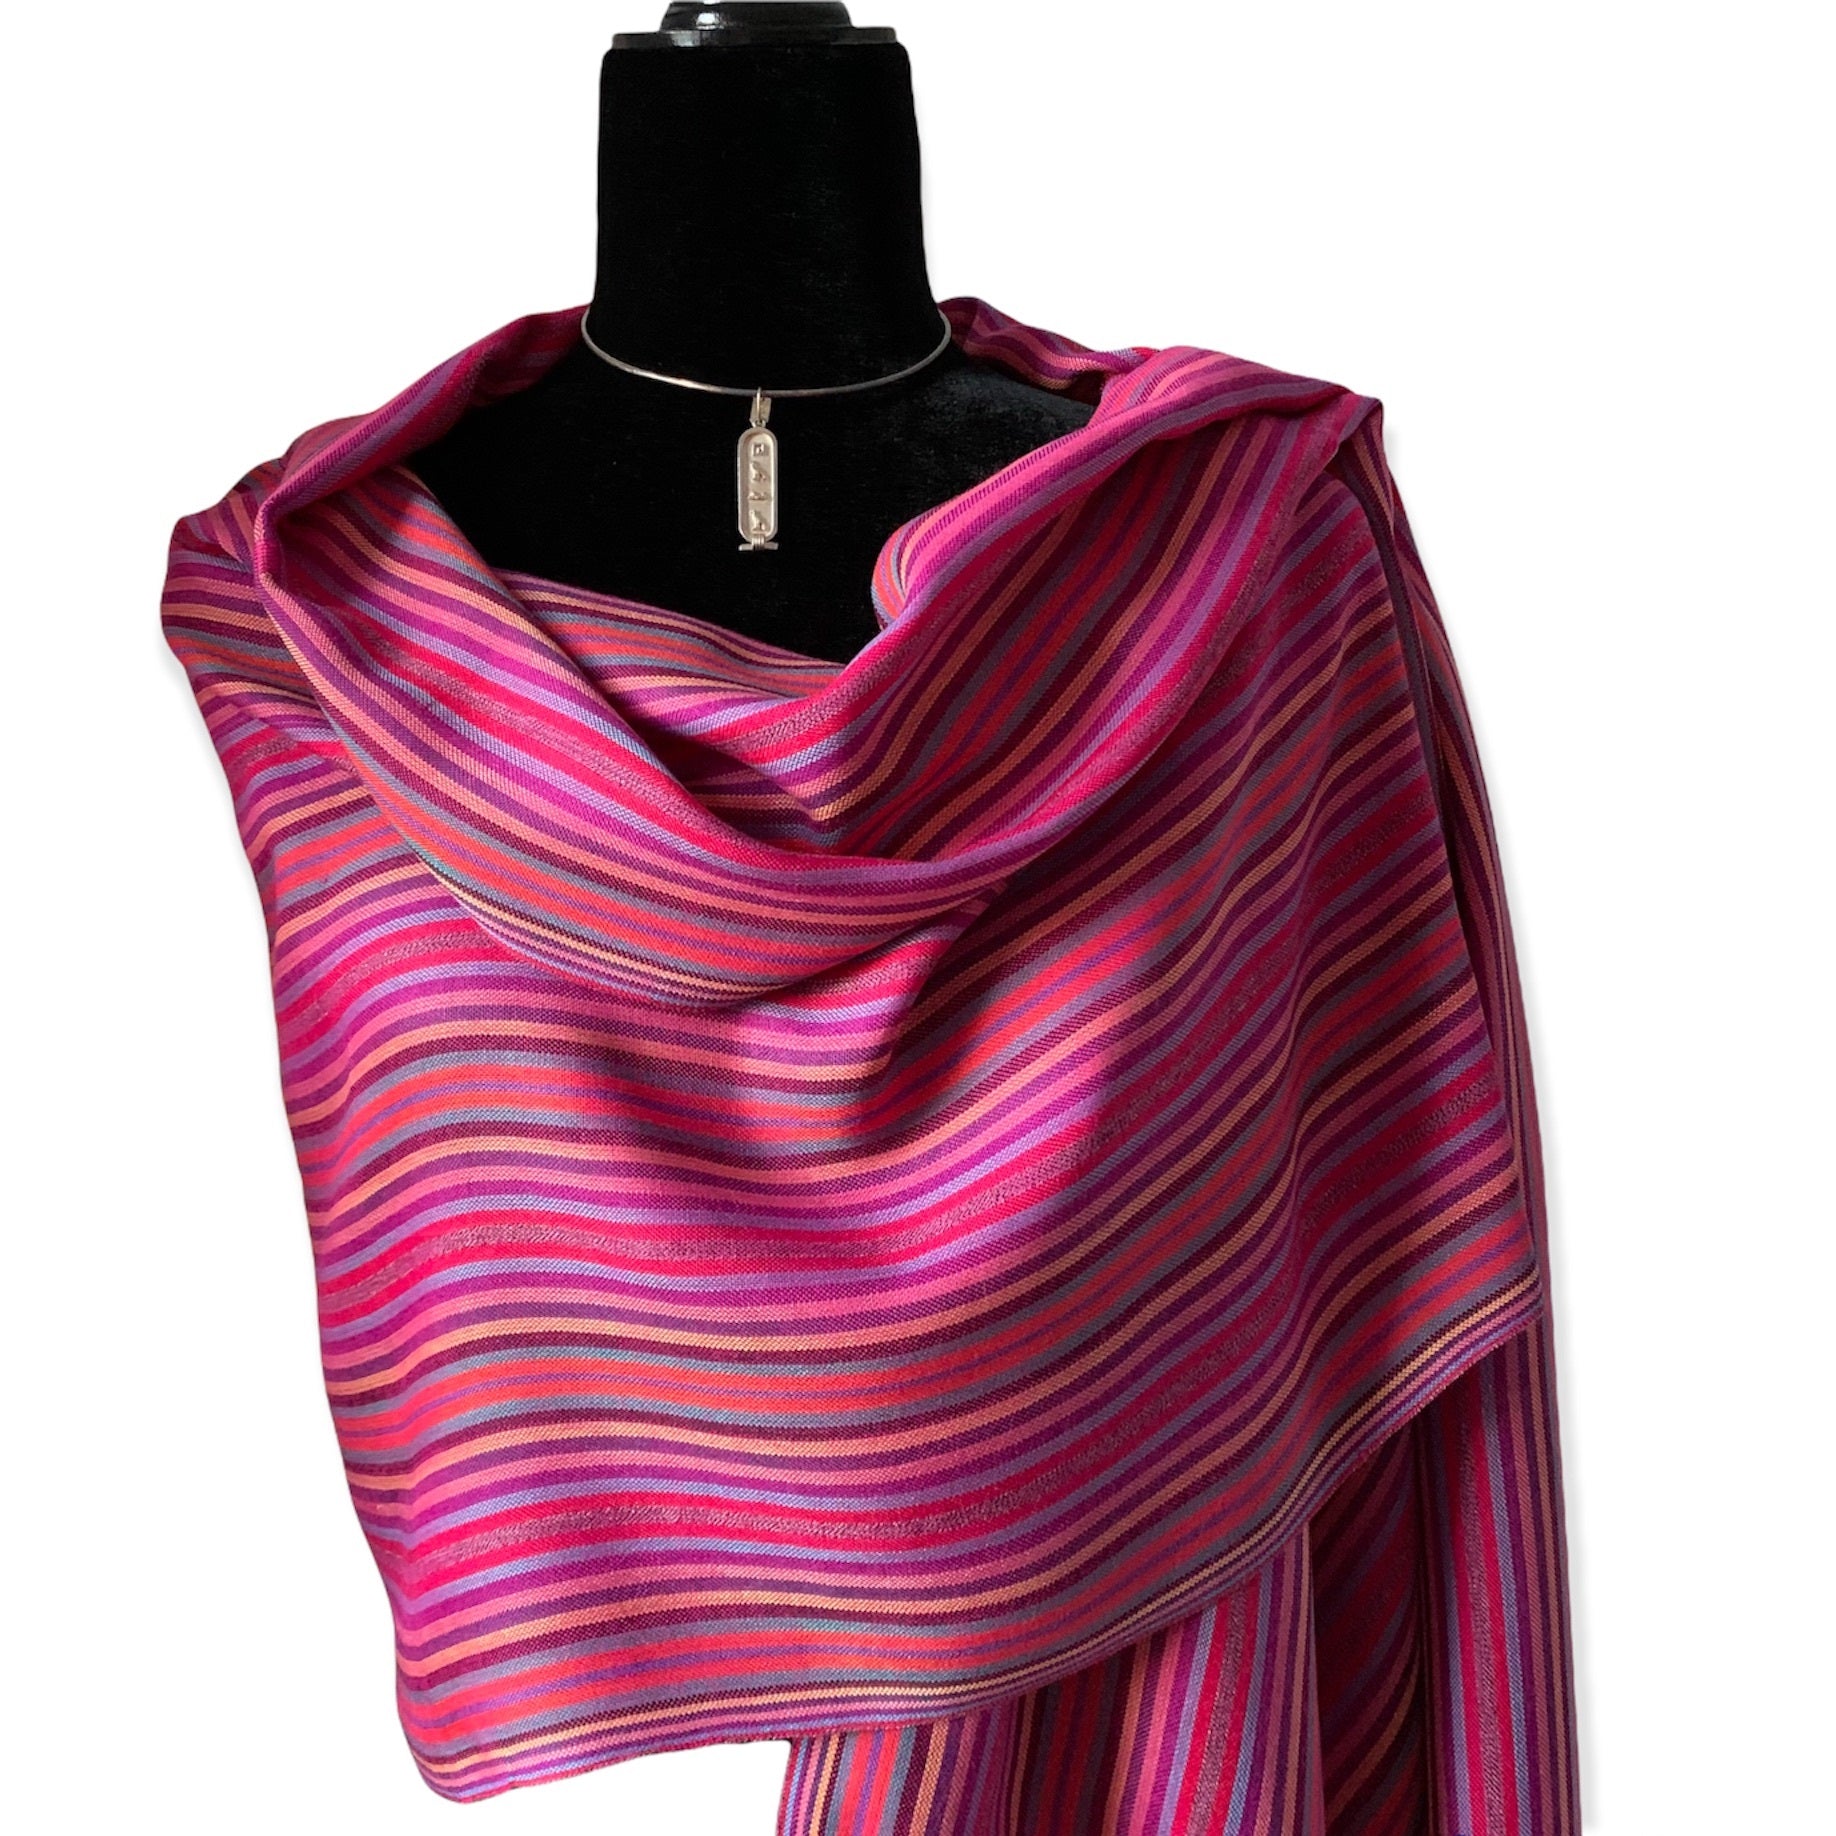 Narrow Striped Handwoven Scarf - Shades of Pink